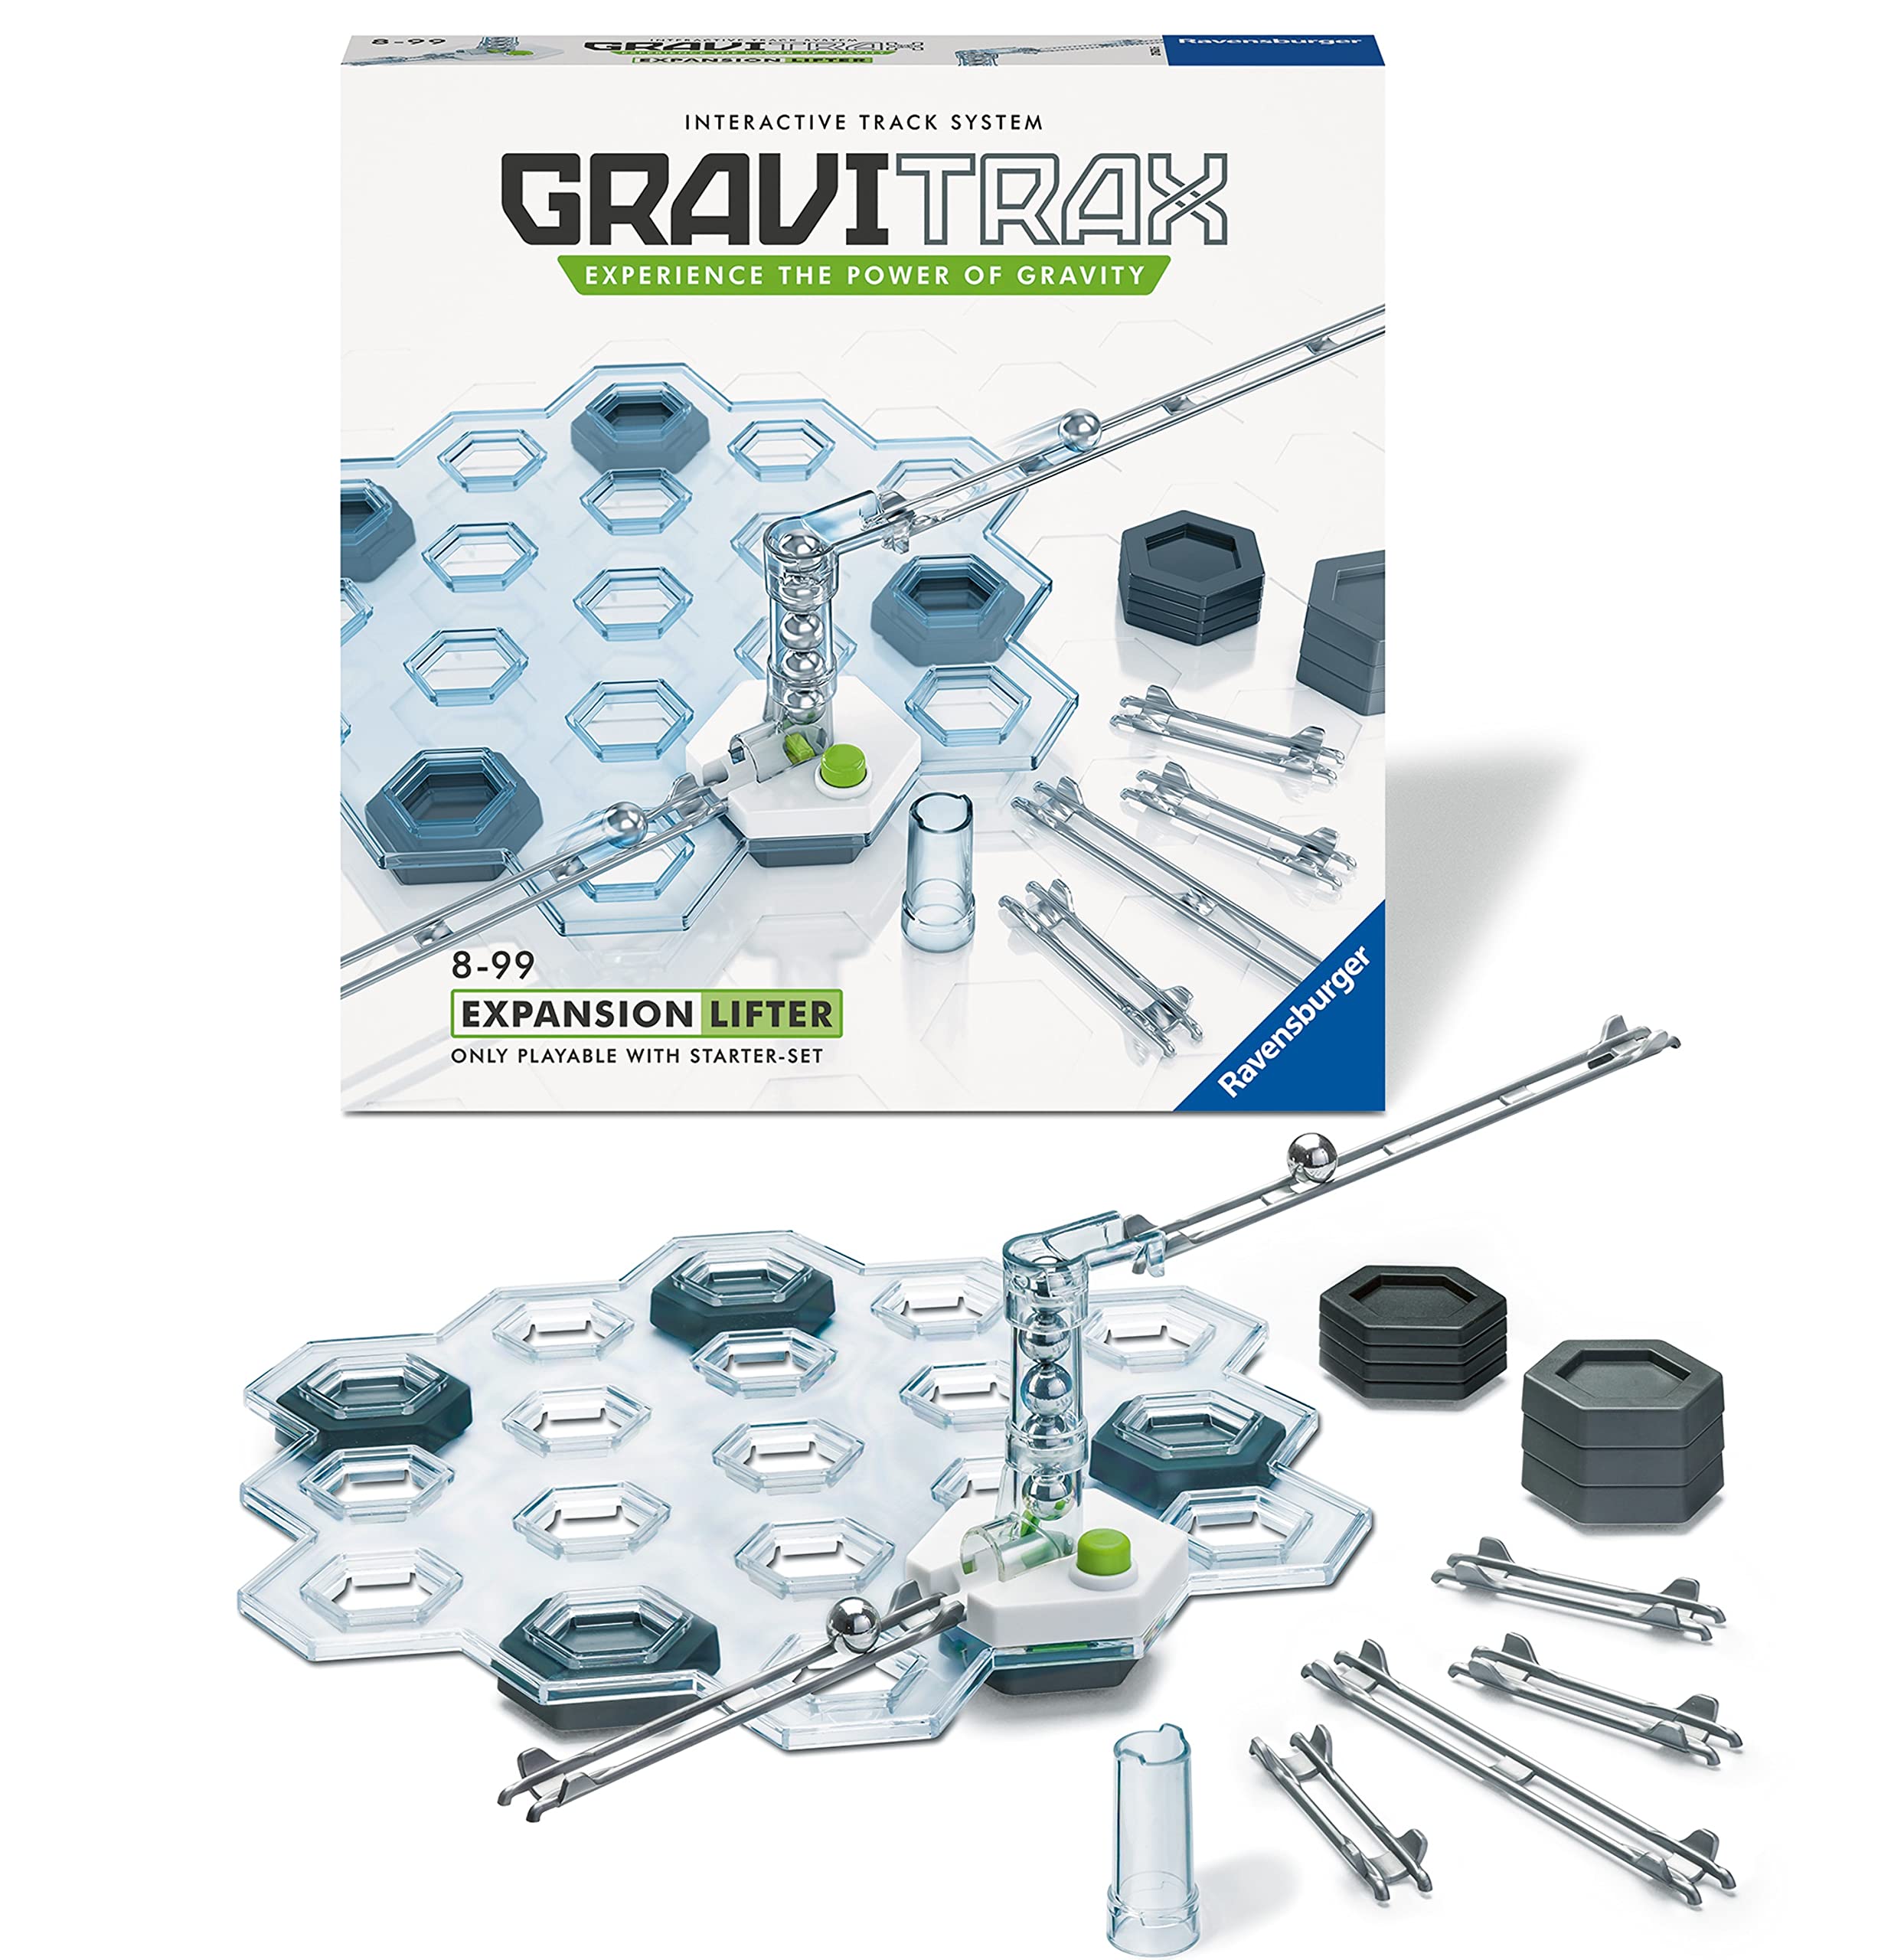 Ravensburger Gravitrax LIFTER Expansion Set Marble Run & STEM Toy For Boys & Girls Age 8 & Up - Expansion For 2019 Toy of The Year Finalist Gravitrax